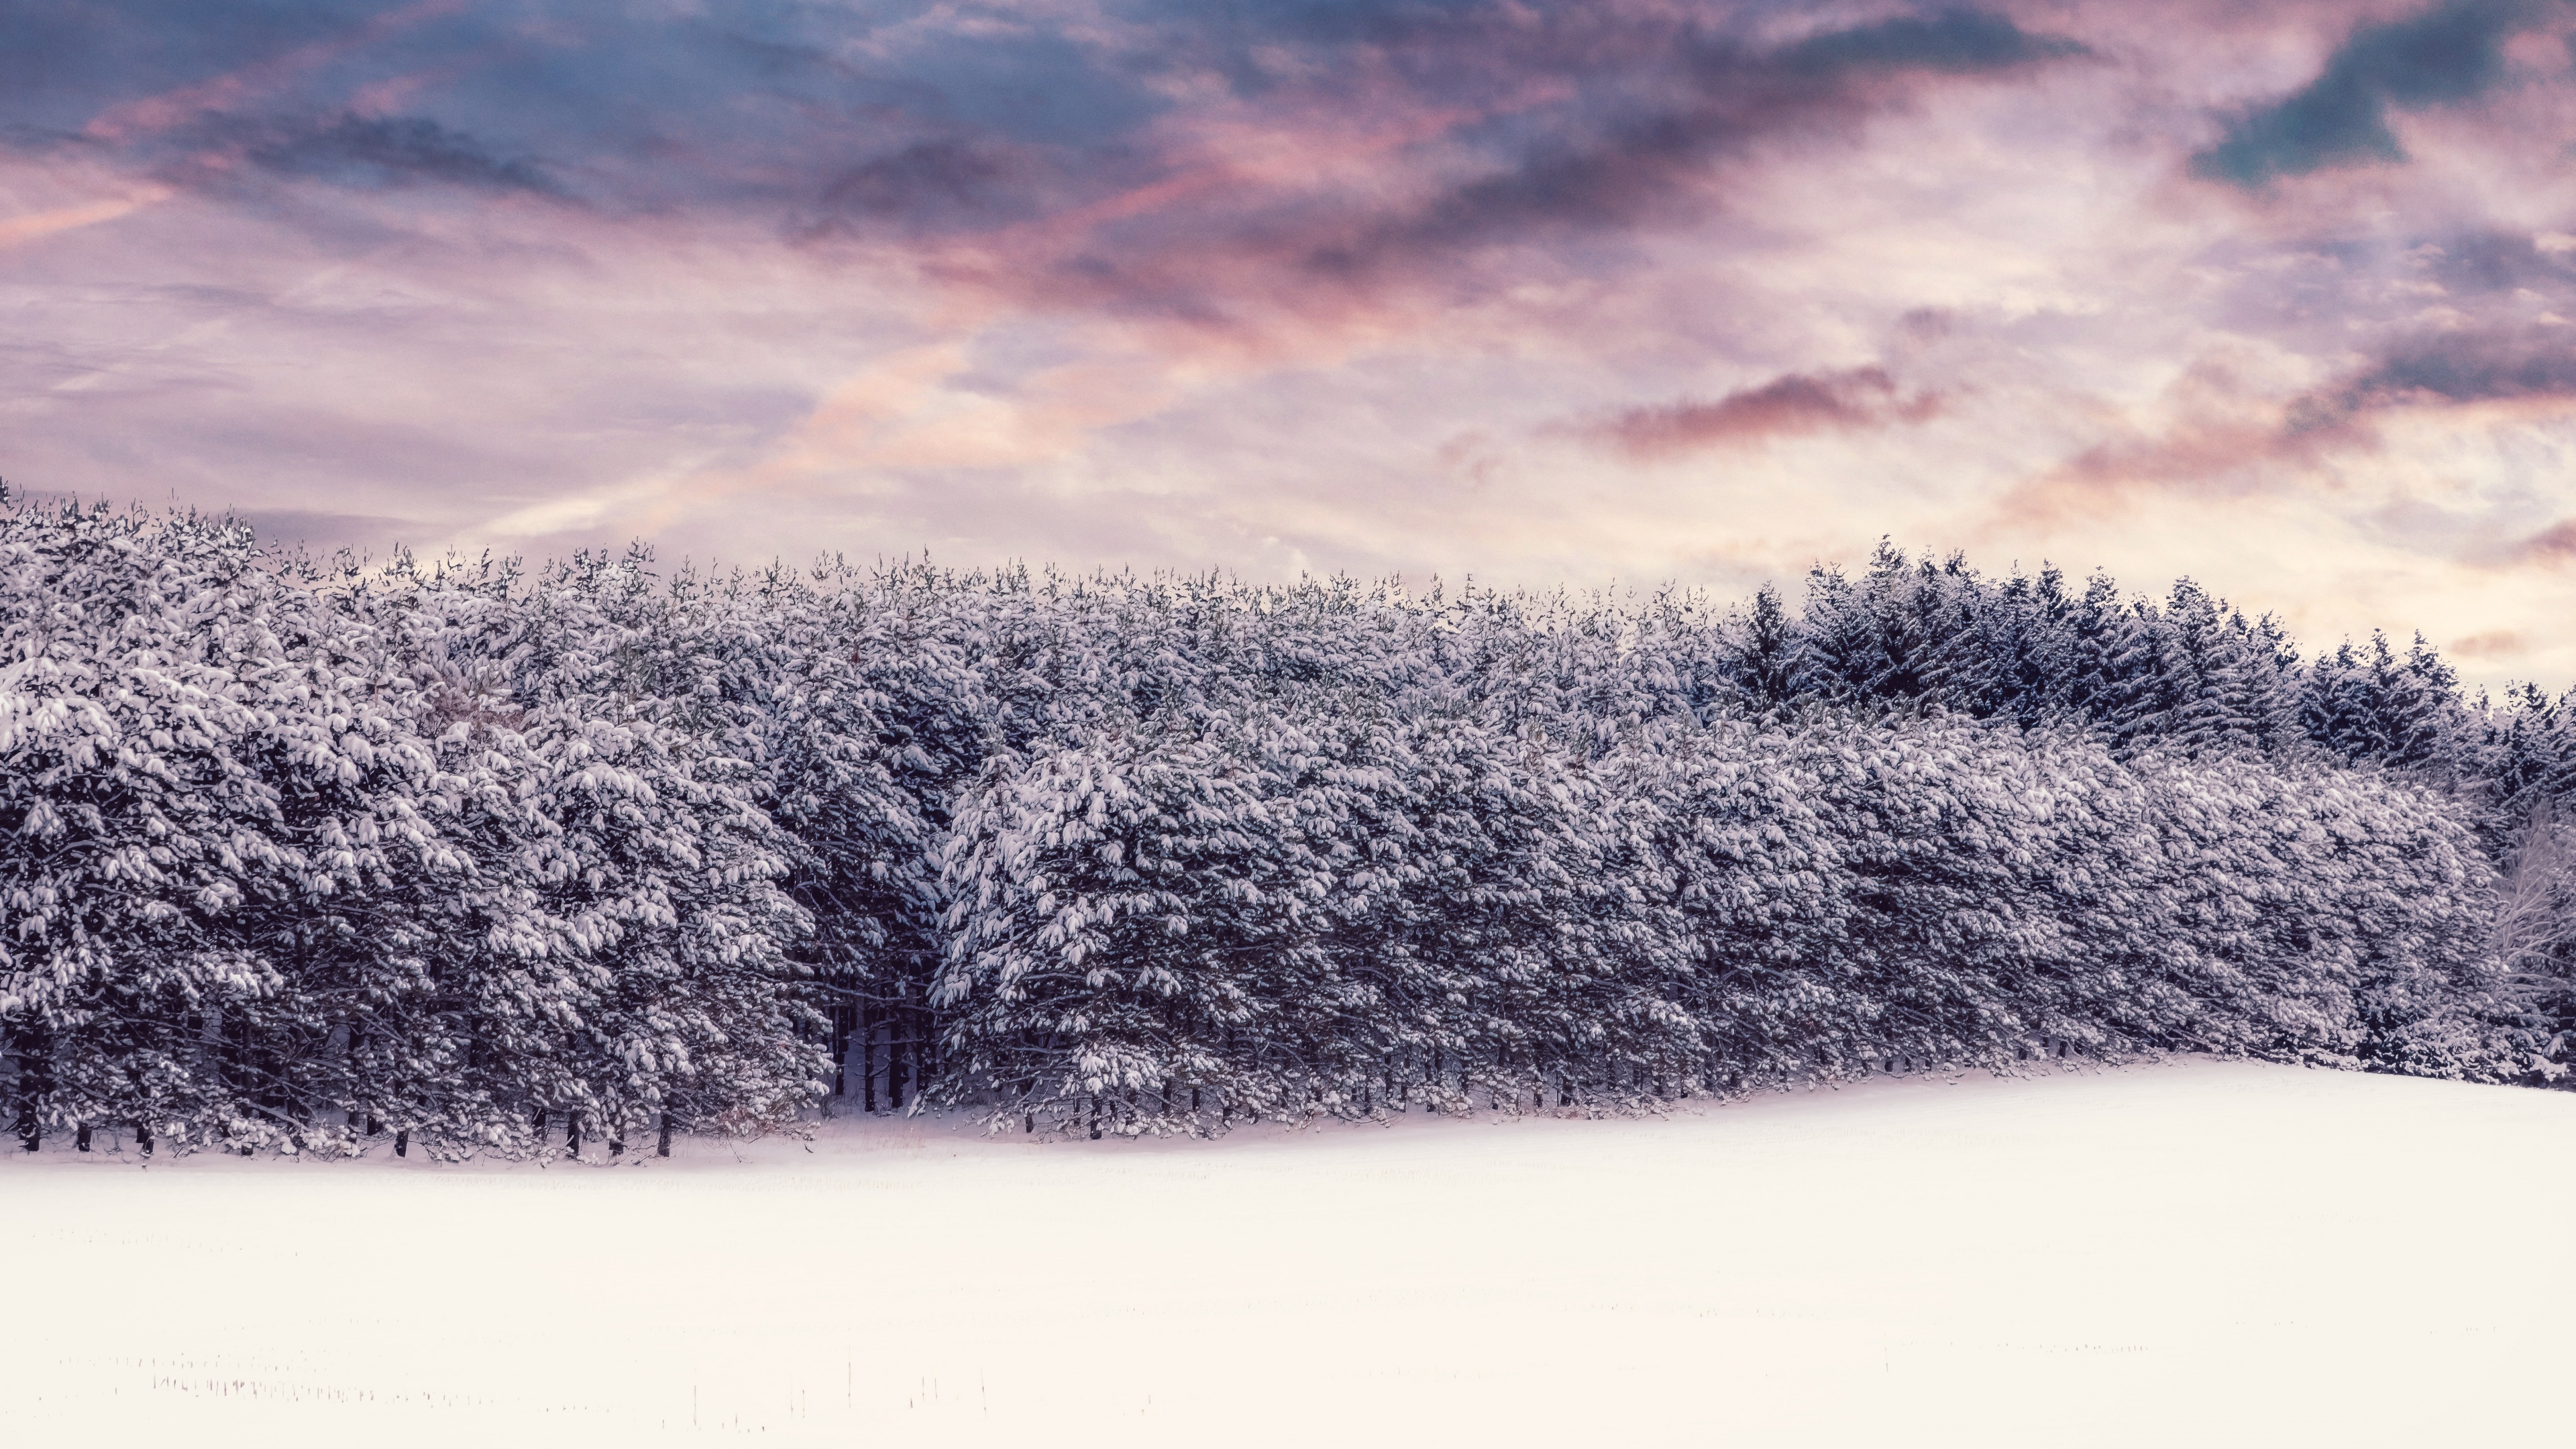 Snow covered Wallpaper 4K, Trees, Winter snow, Landscape, Clouds, Scenery, Nature